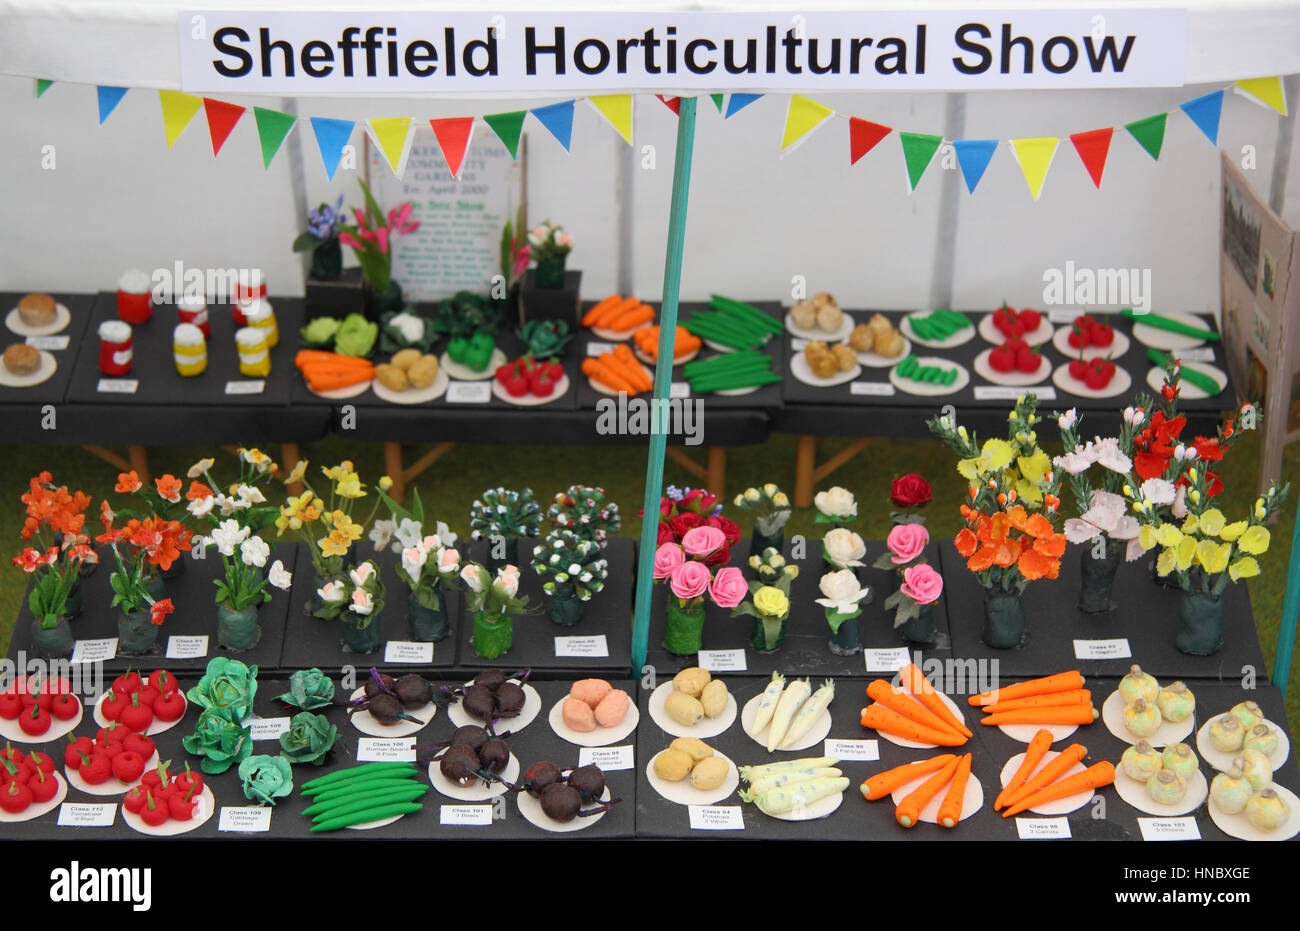 Miniature replication of Sheffield Horticultural Show displayed at its namesake at Sheffield Fayre, Norfolk Heritage Park, Sheffield, Yorks. UK Stock Photo